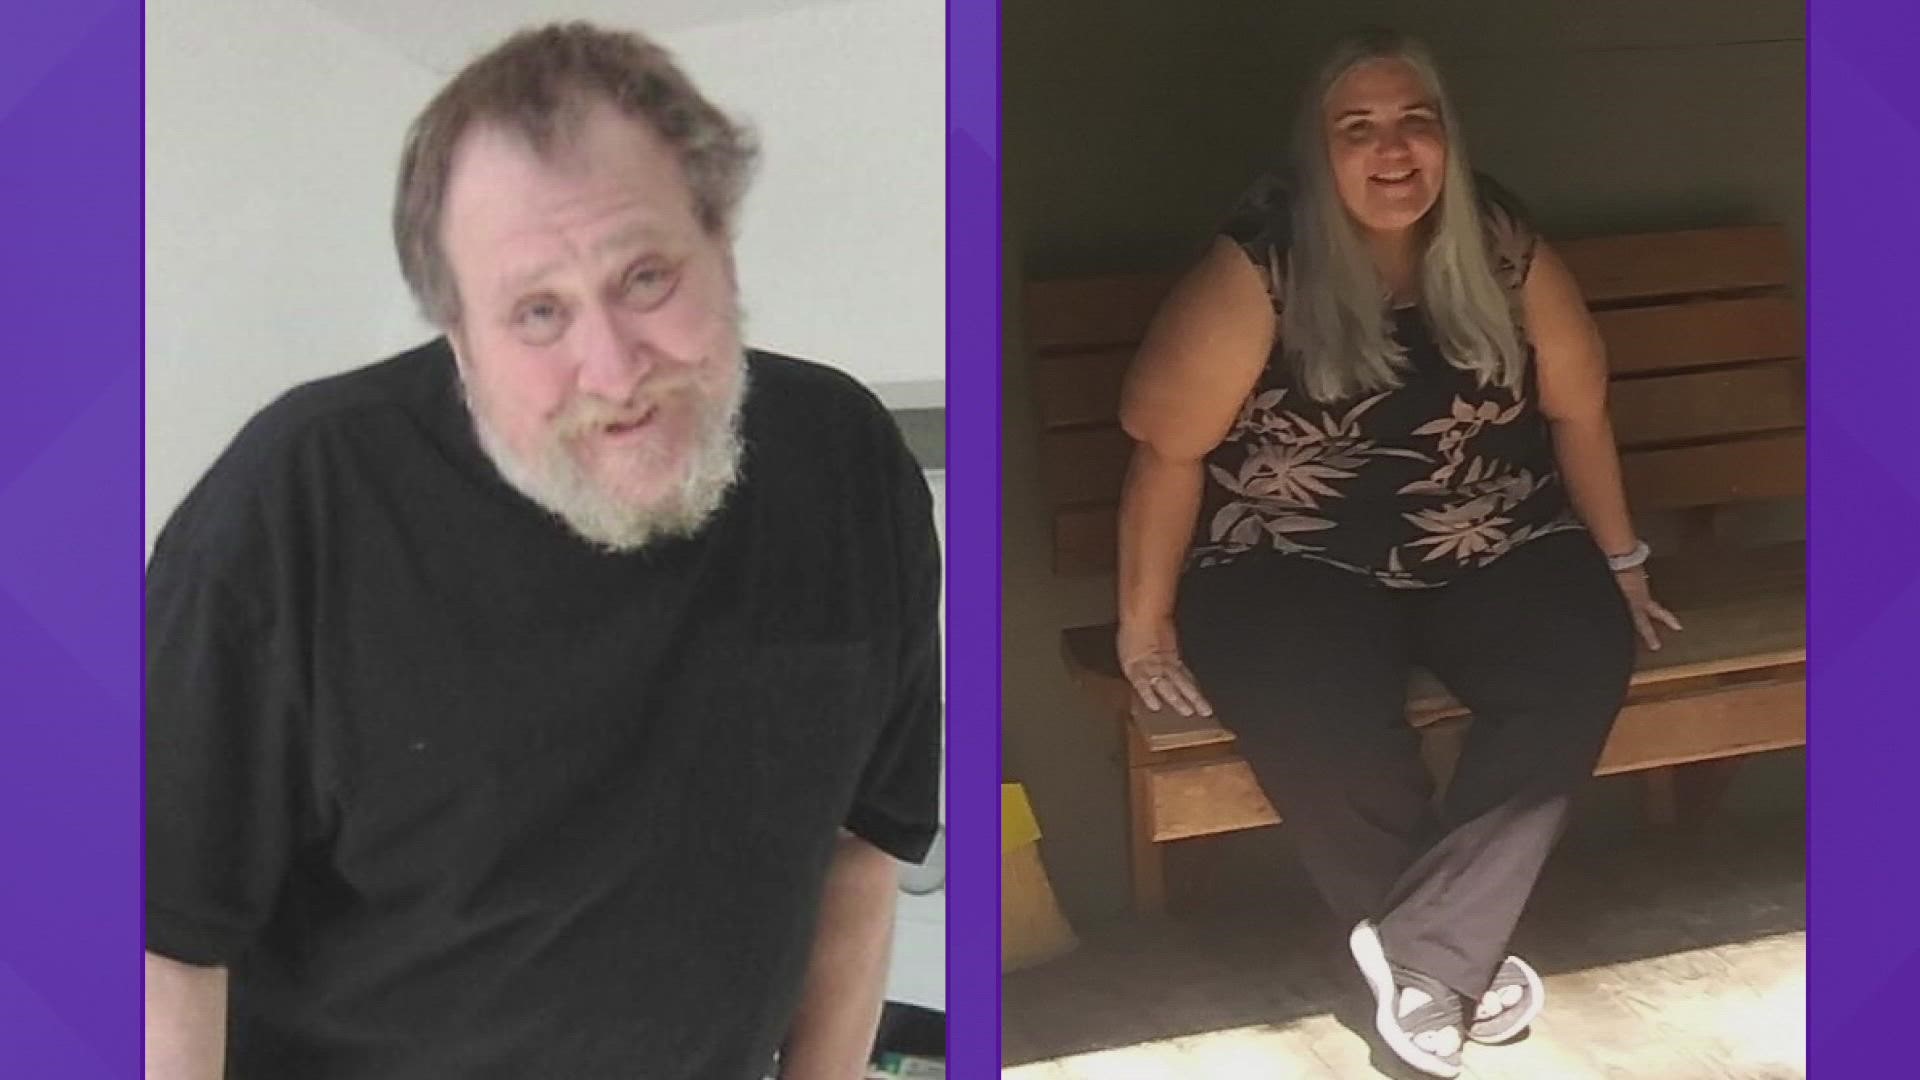 53-year-old Theresa Bergman and her husband 54-year-old Charles Bergman did not return home to Moses Lake as expected on Sunday.